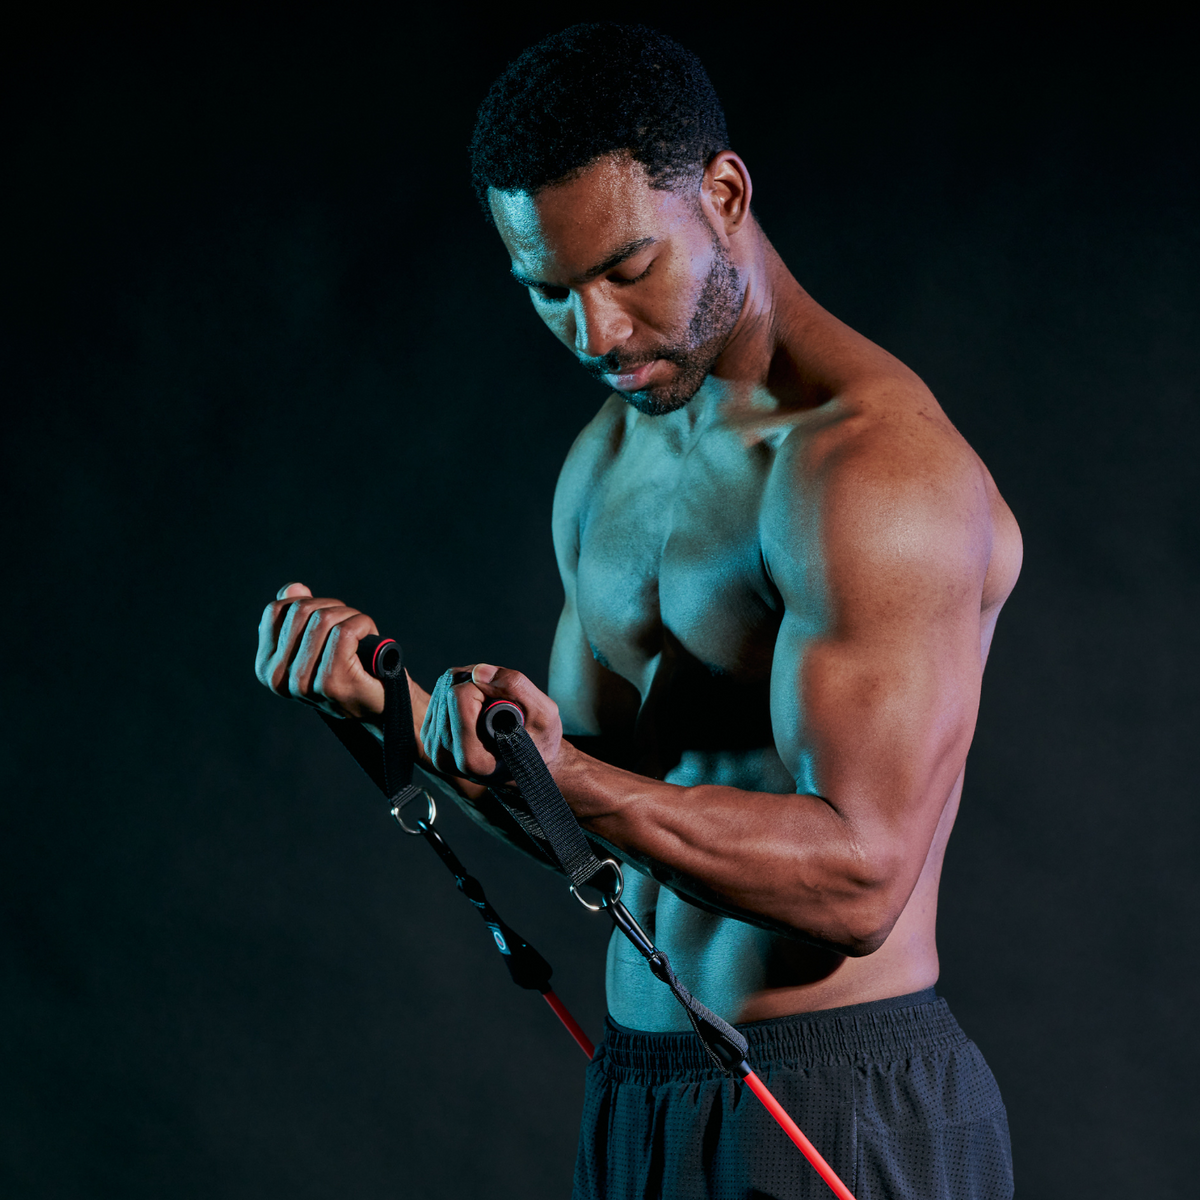 Upper Body Workouts: 5 Shoulder-Strengthening Workouts That Can Help In  Improving Your Form